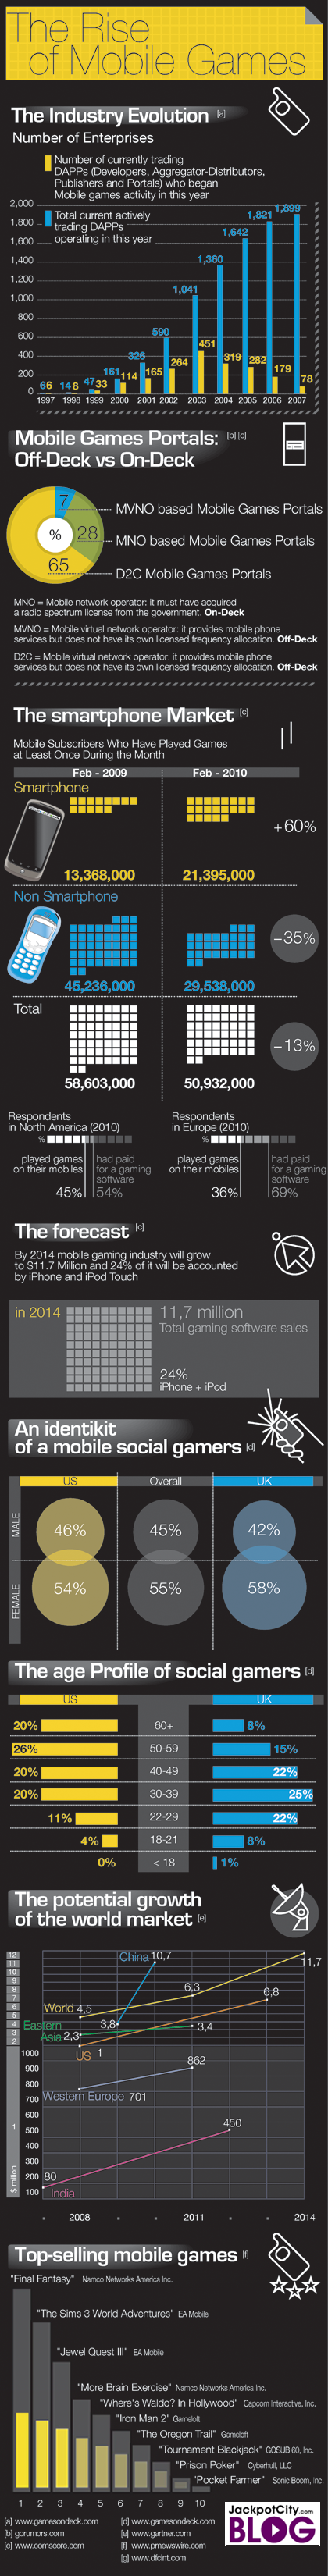 The Rise of Mobile Gaming infographic